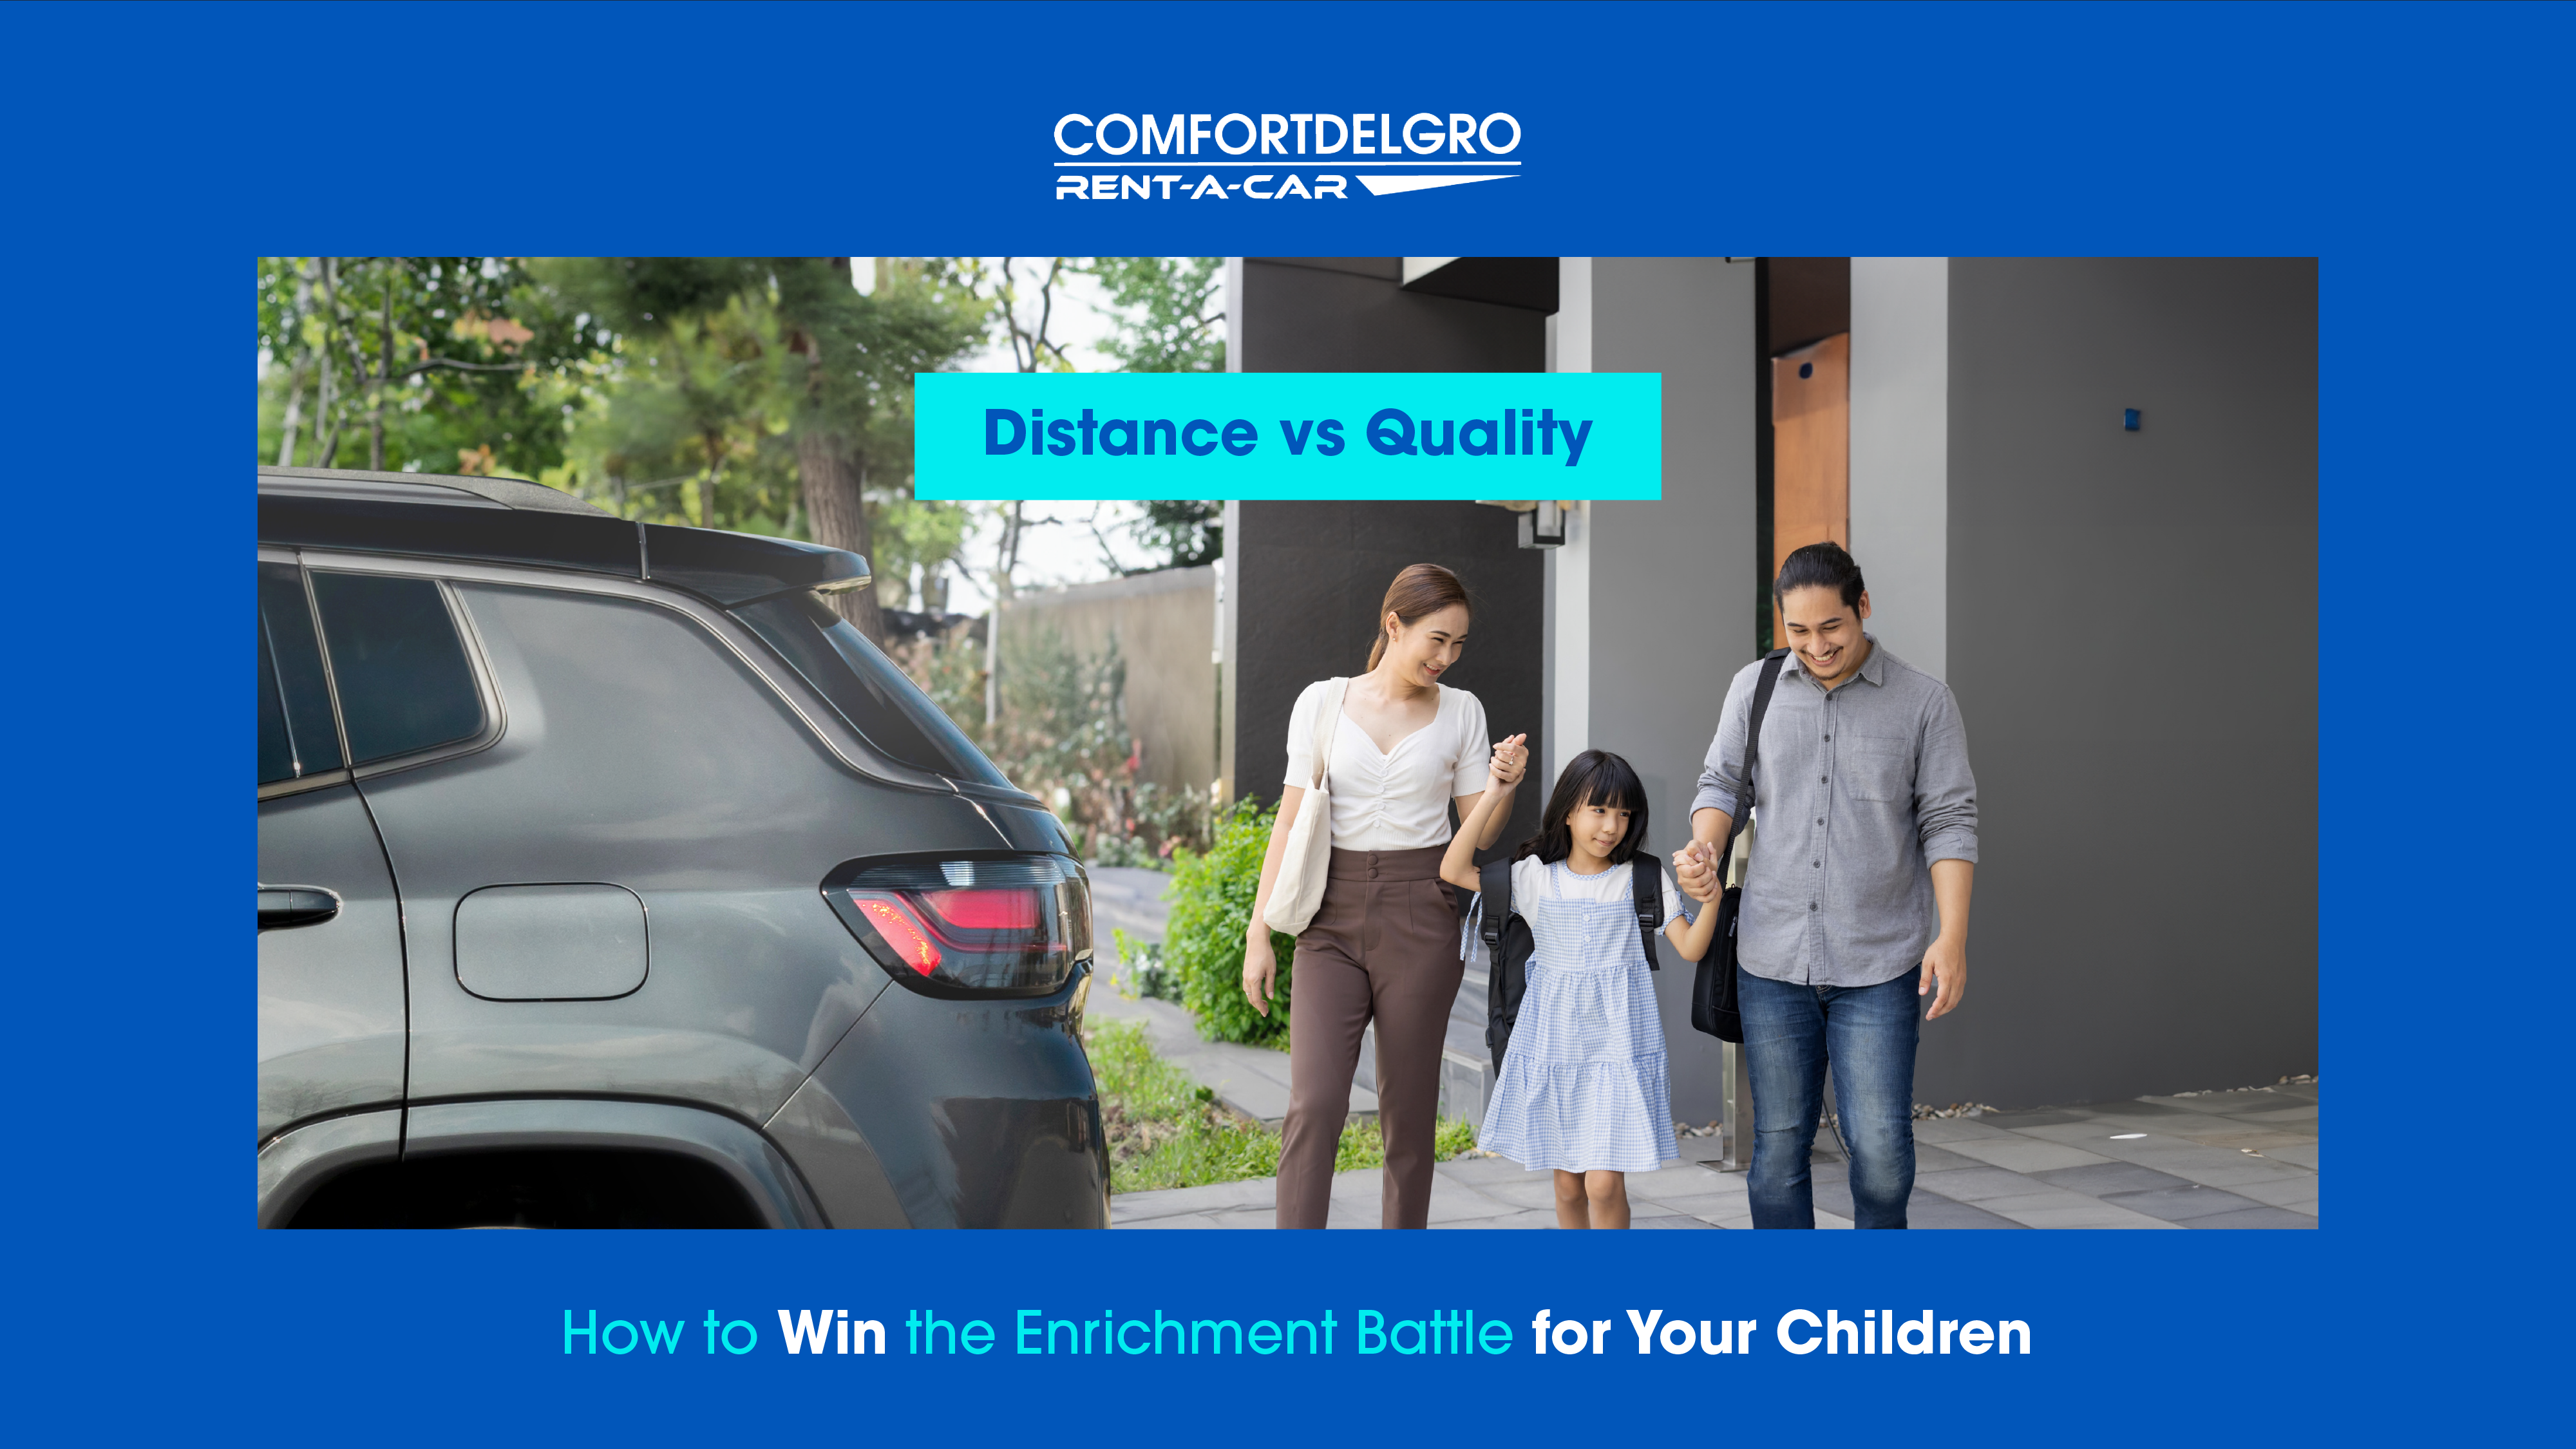 Distance vs Quality: How to Win the Enrichment Battle for Your Children